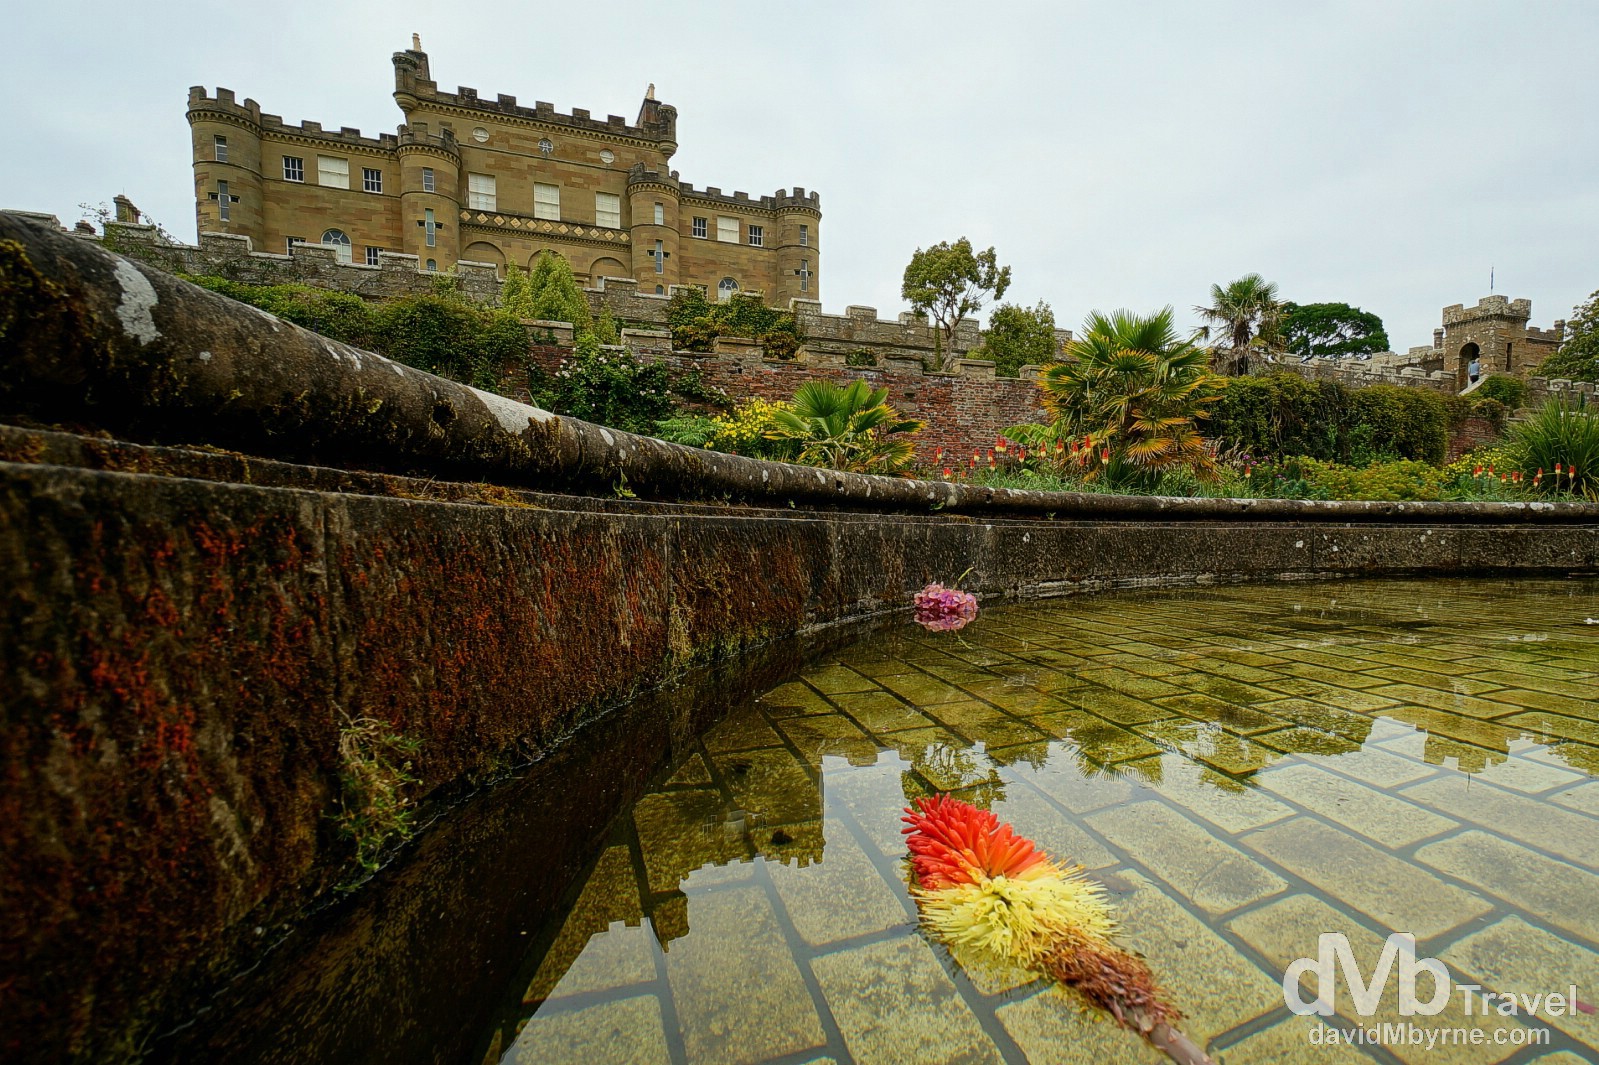 A section of the decorative water fountain fronting Culzean Castle, Ayrshire, Scotland. September 19, 2014. 